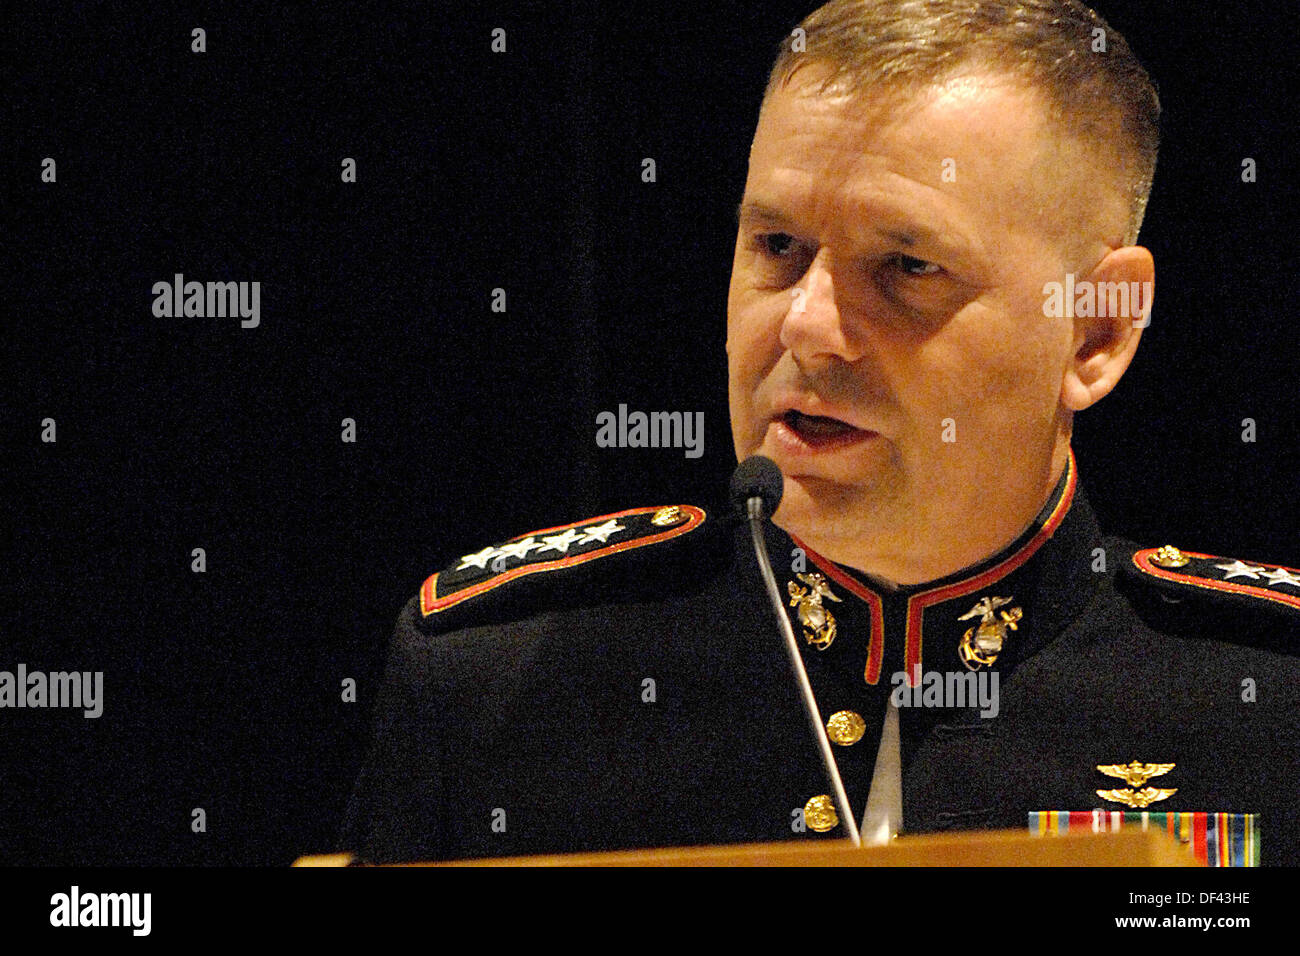 United States Marine General <b>James Cartwright</b>, Vice Chairman of the Joint ... - united-states-marine-general-james-cartwright-vice-chairman-of-the-DF43HE